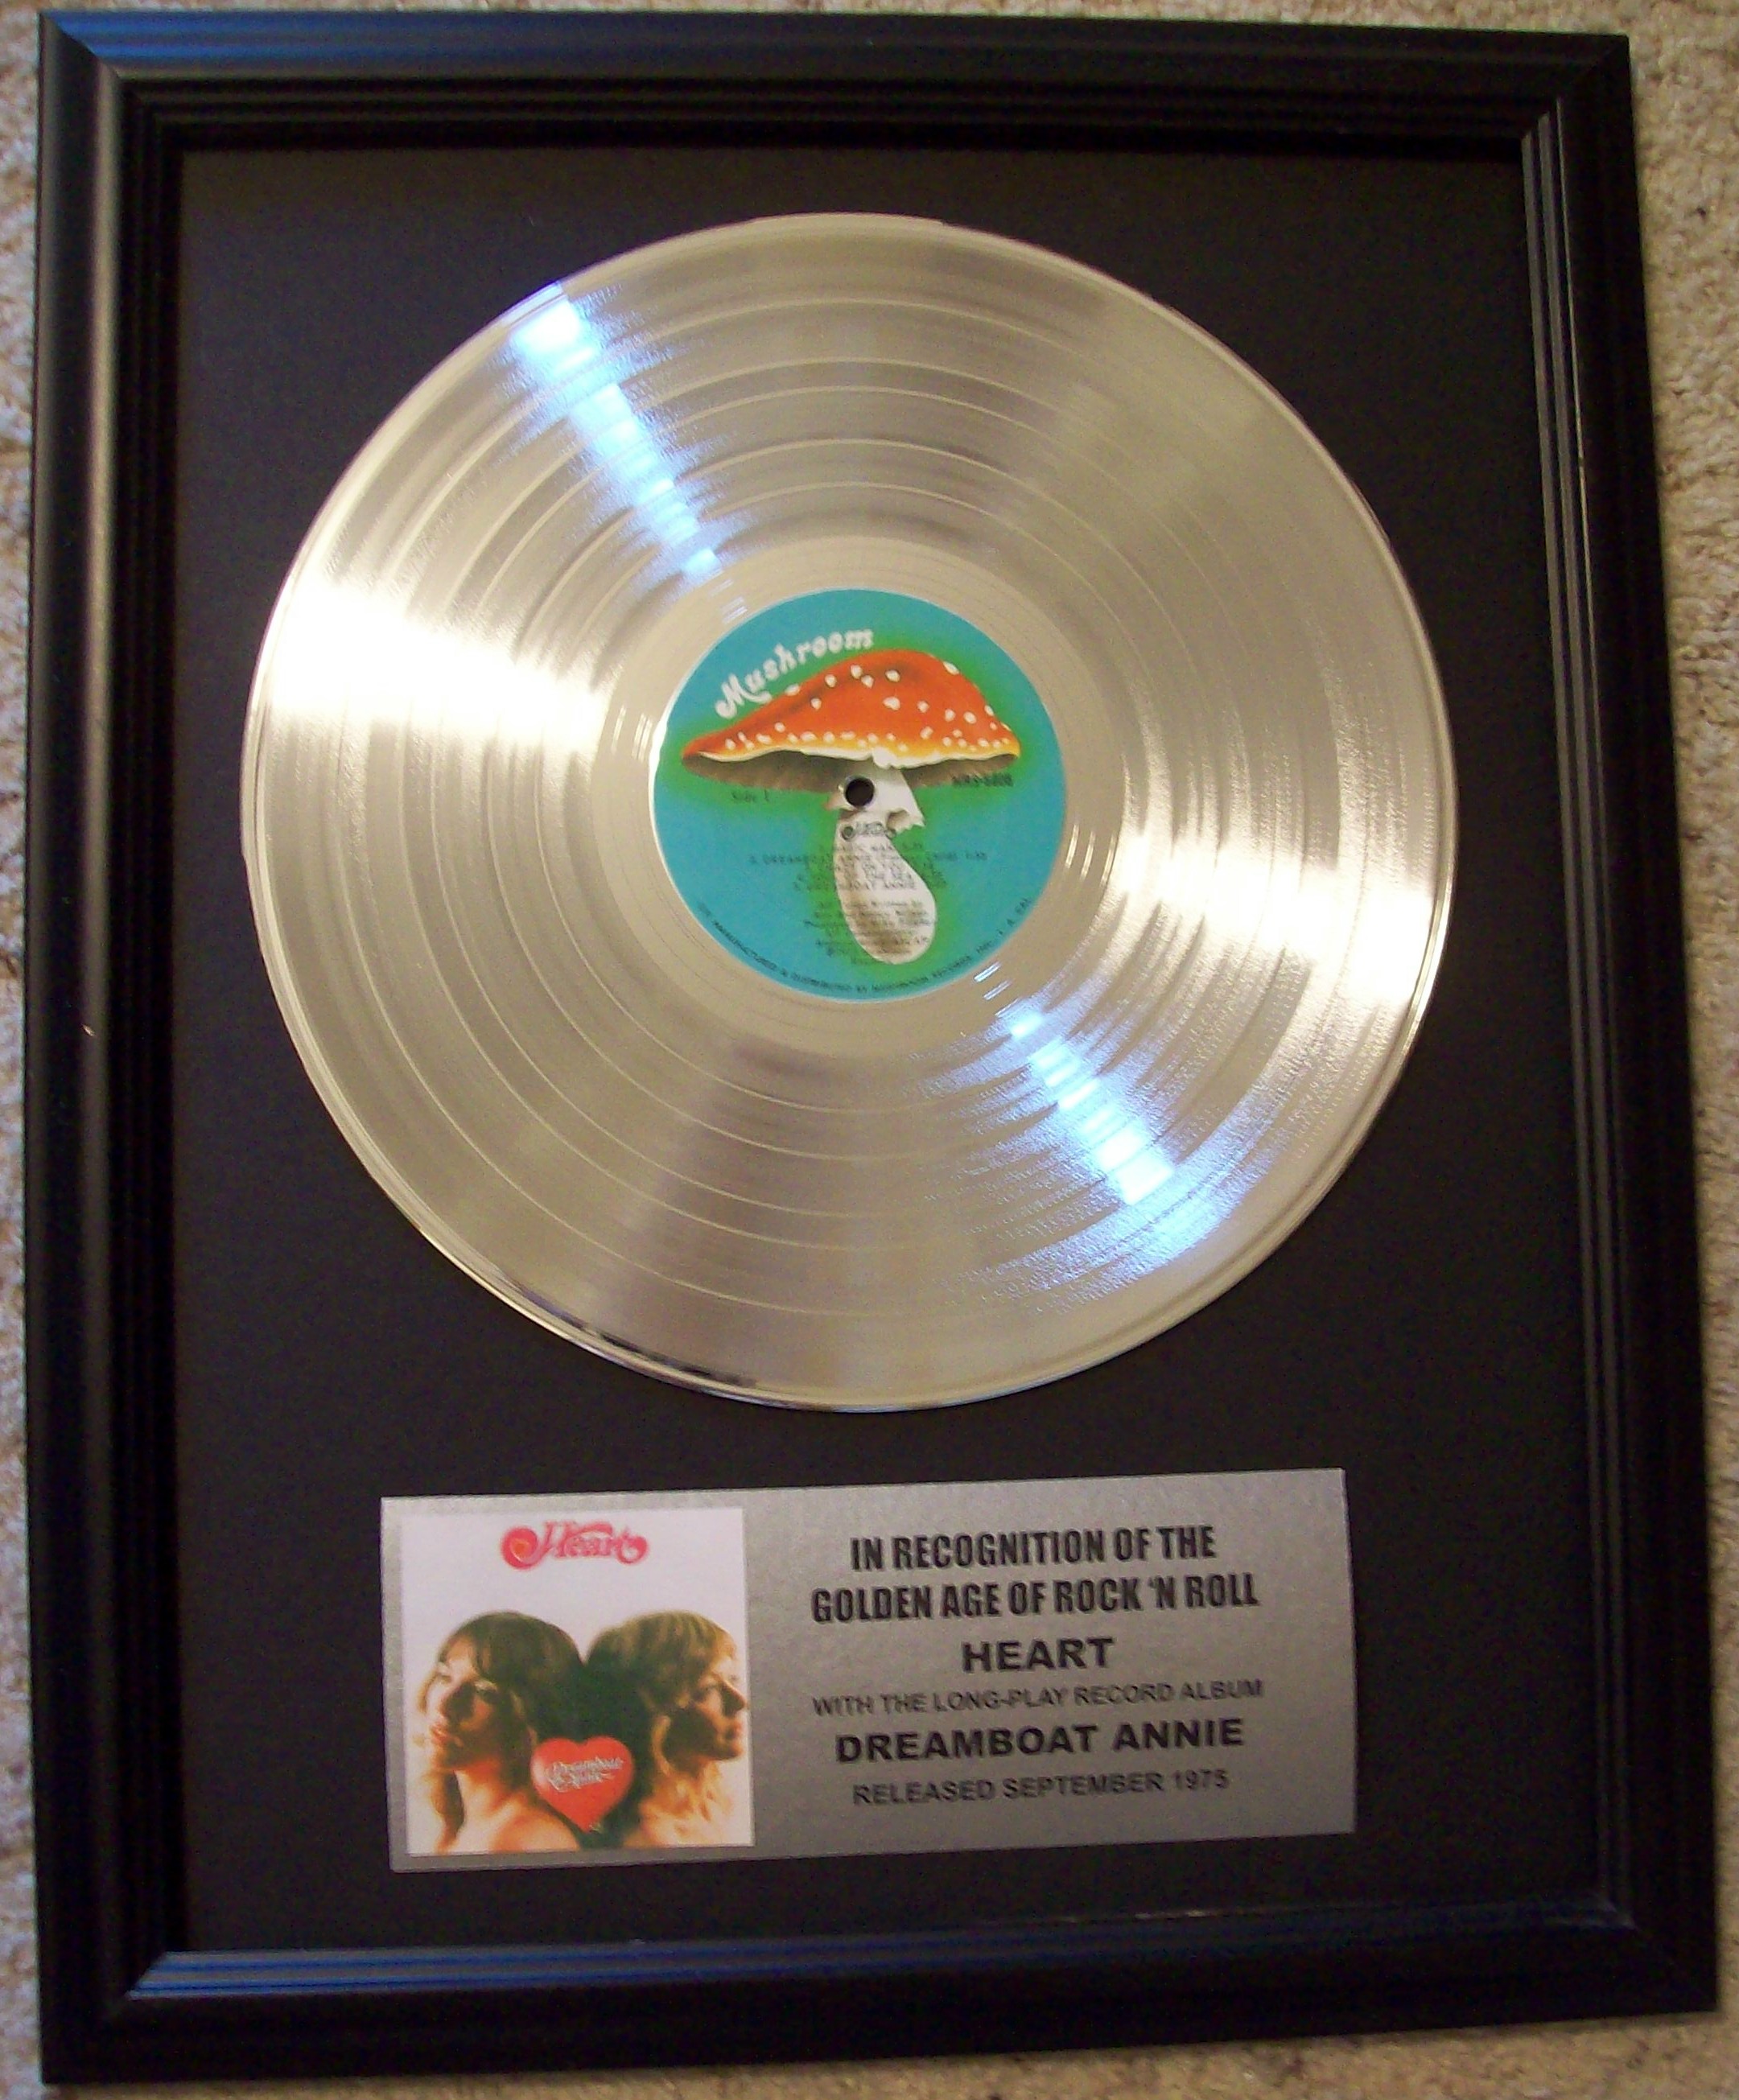 Image for Heart Dreamboat Annie Platinum LP Record